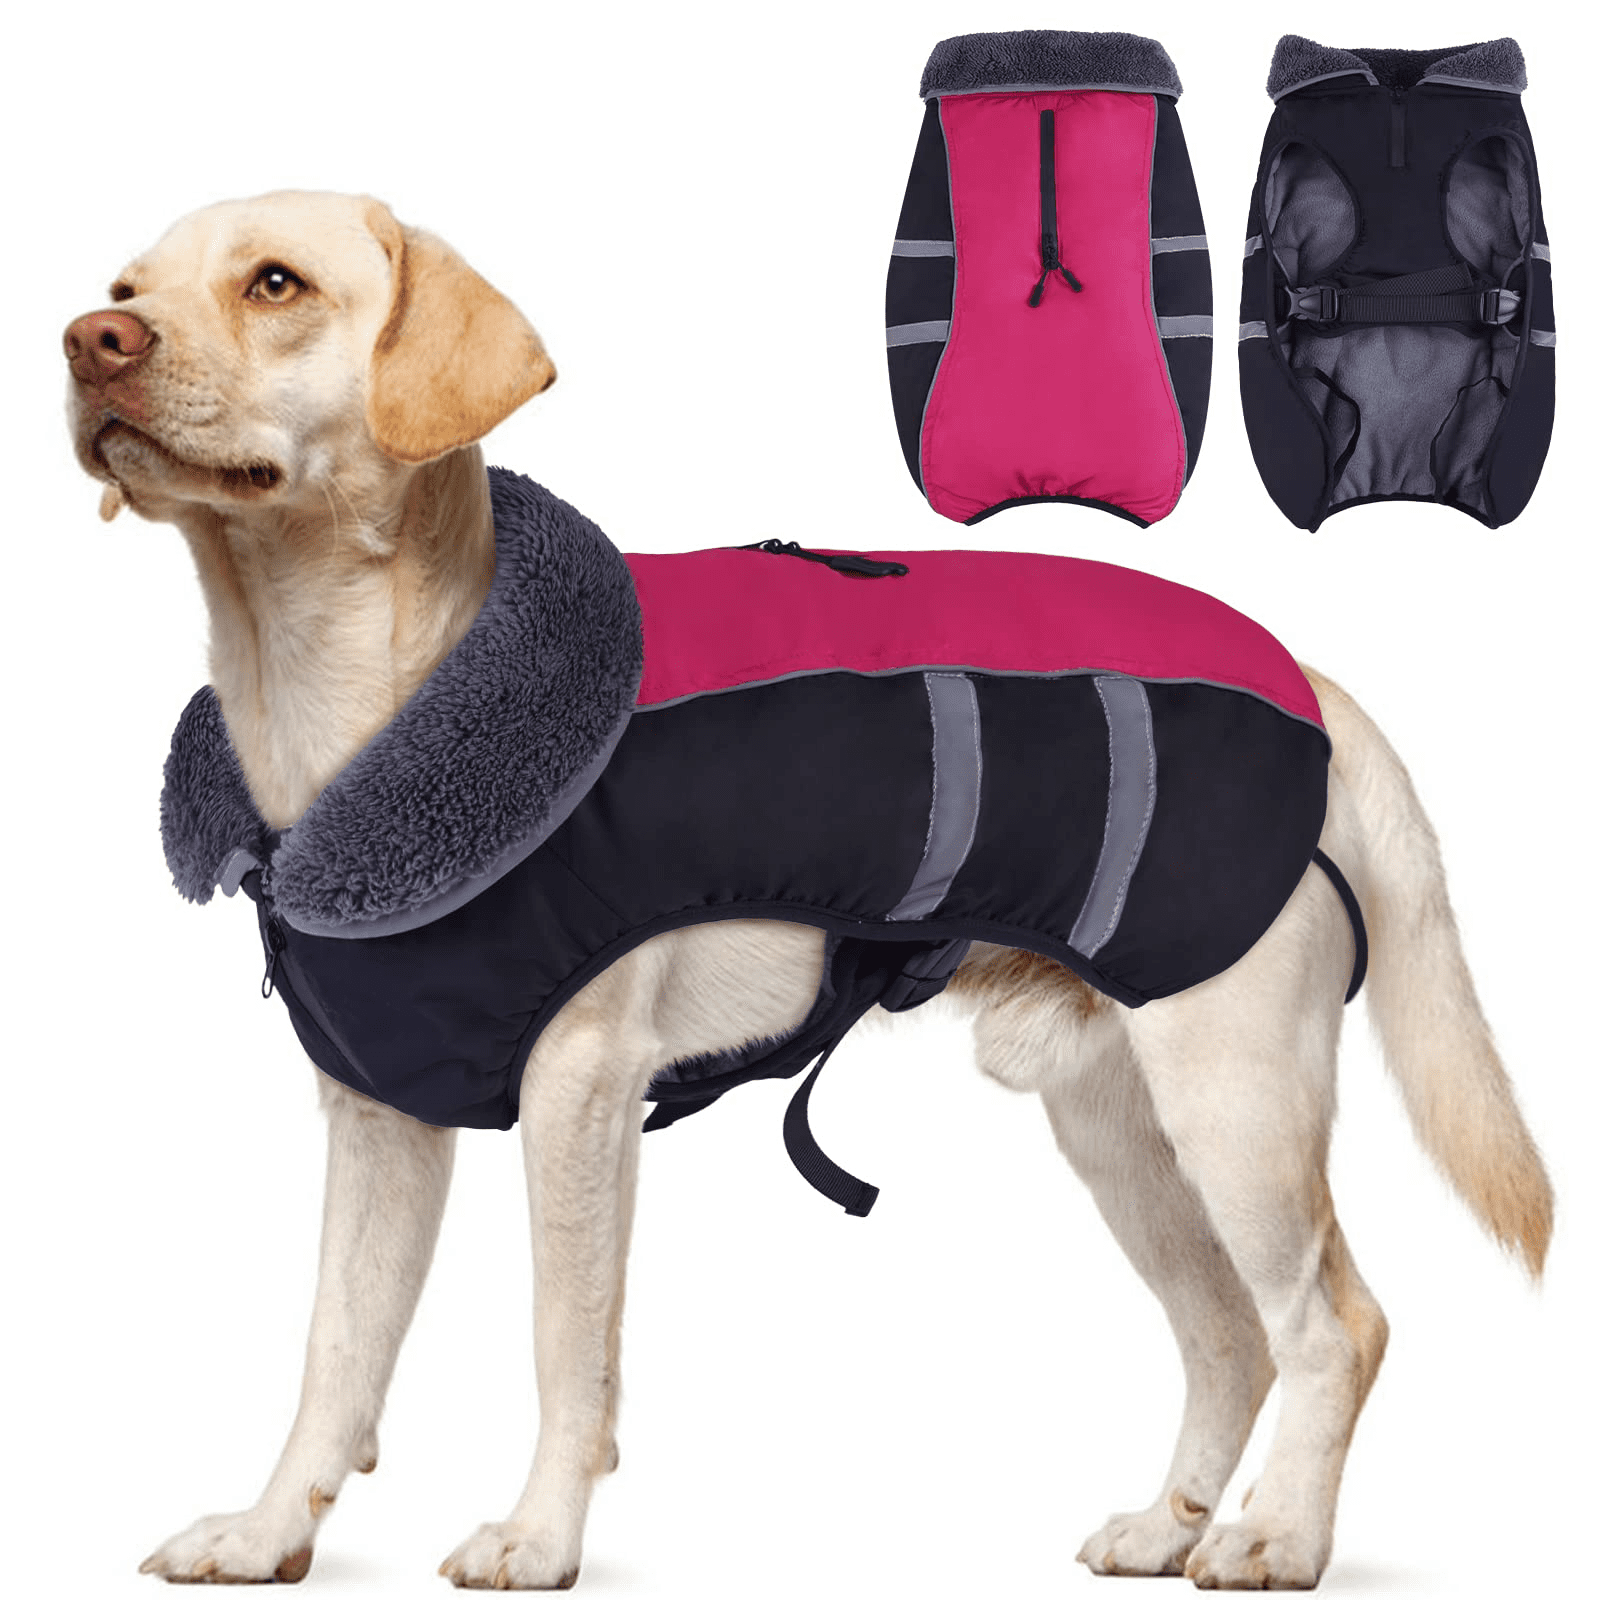 Thicken Fleece Lining Pet Outfit，Adjustable Pet Vest Apparel for Small Medium Large Dogs Warm Dog Coat Reflective Dog Winter Jacket，Waterproof Windproof Dog Turtleneck Clothes for Cold Weather